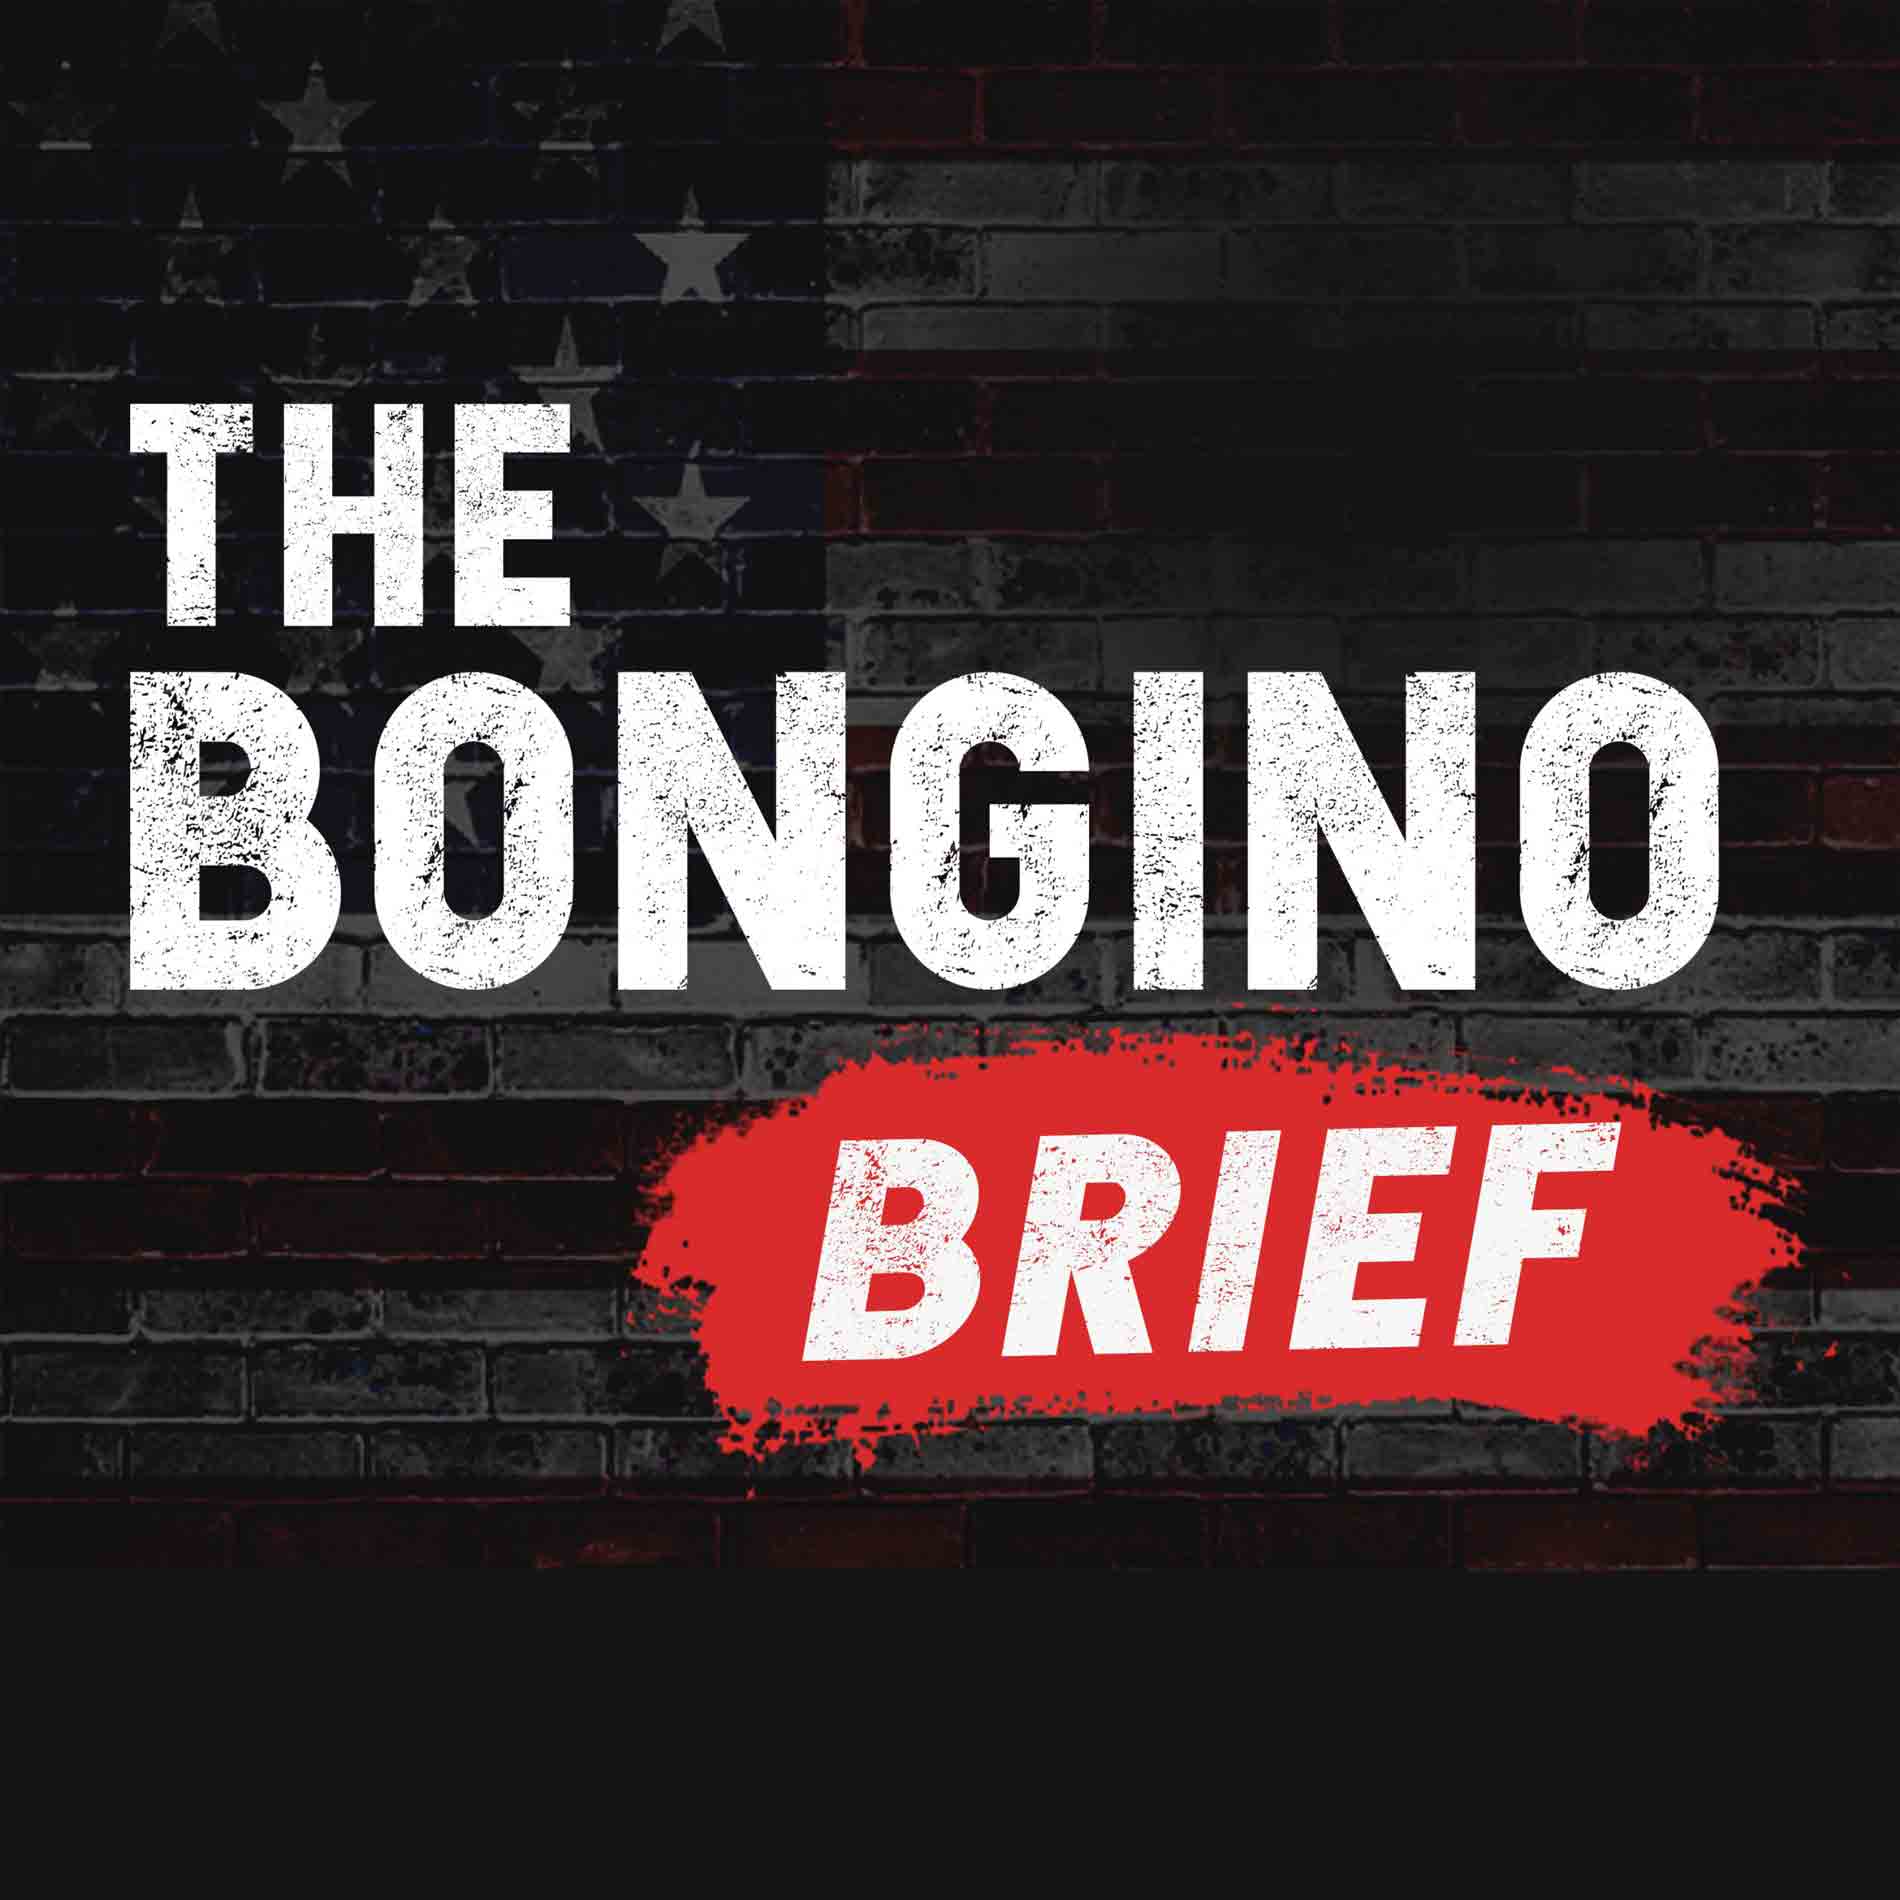 THE DAN BONGINO SHOW PODCAST EXCLUSIVE: INTERVIEW WITH PRESIDENT DONALD J. TRUMP RECORDED TODAY